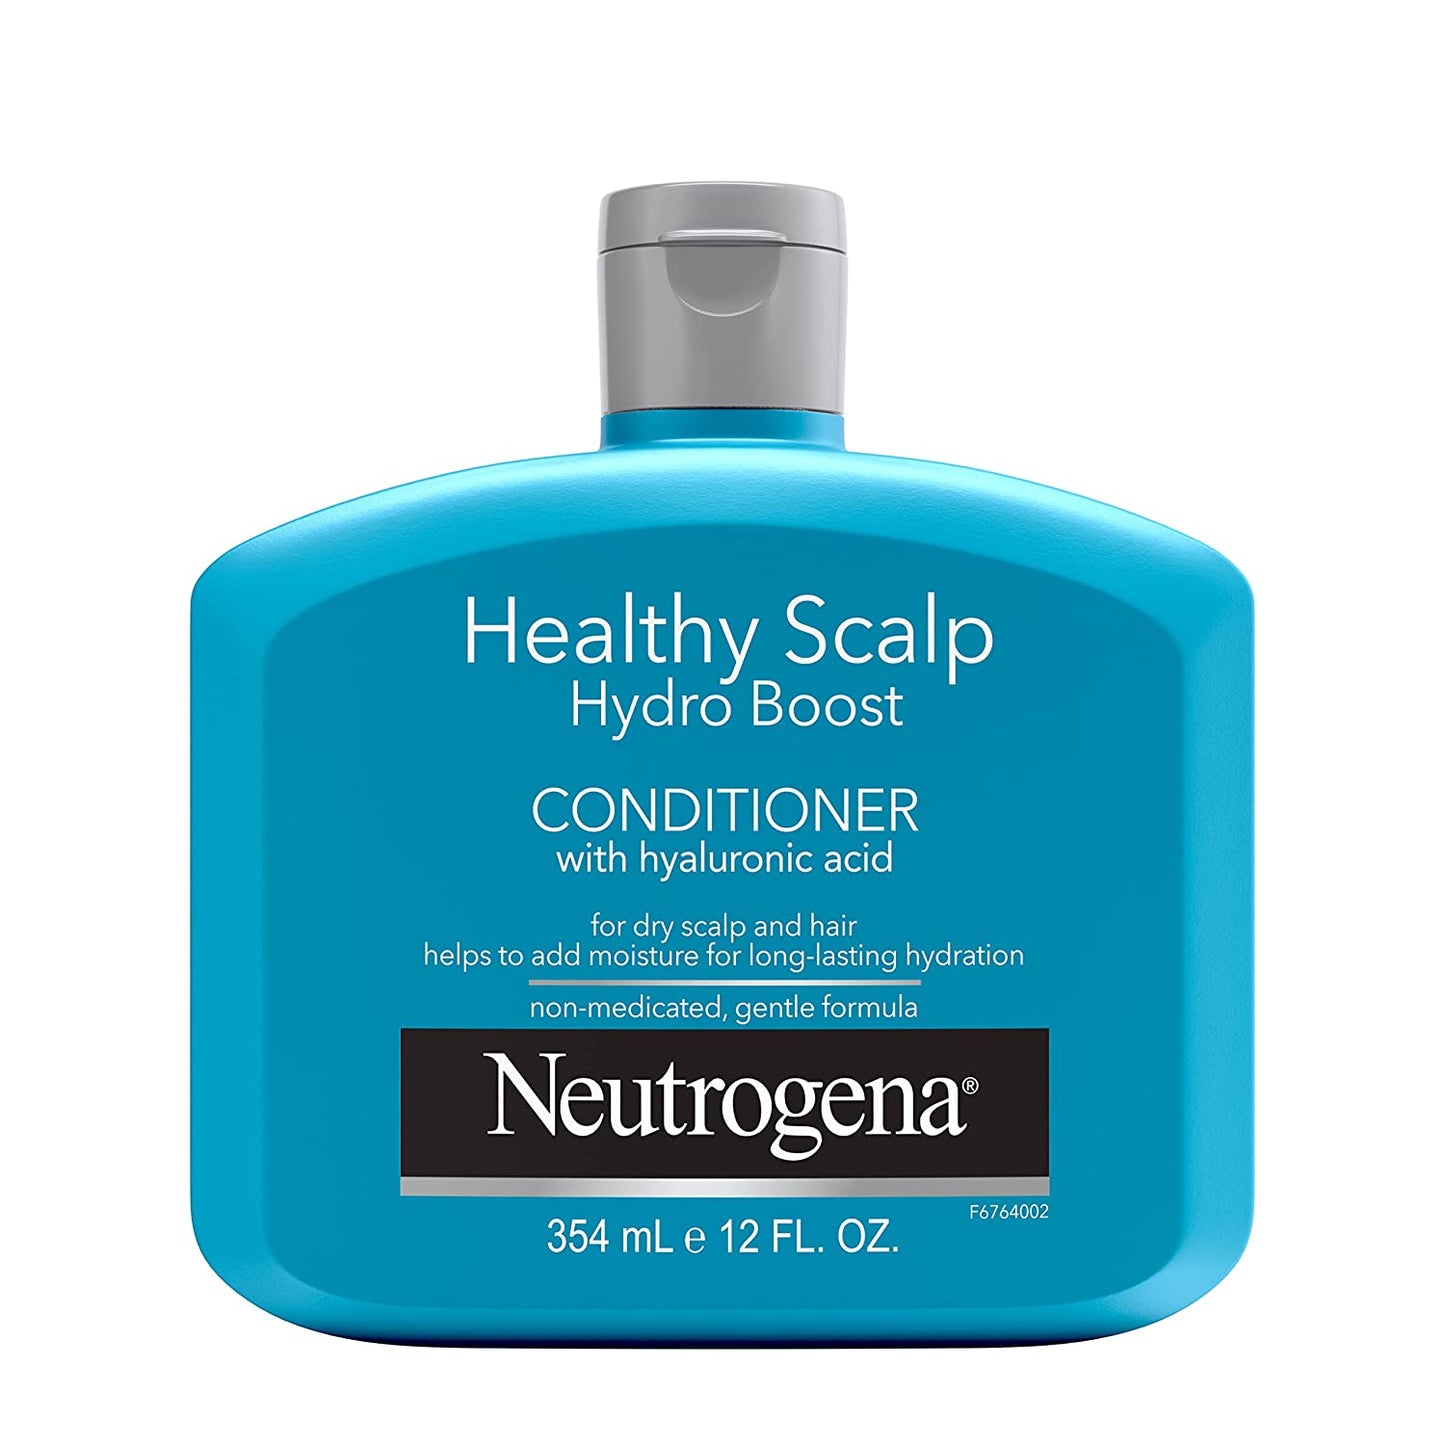 Neutrogena Hydro Boost Conditioner with Hydrating Hyaluronic Acid for Dry Hair and Scalp, Moisturizing Healthy Scalp 12 fl oz/354ml